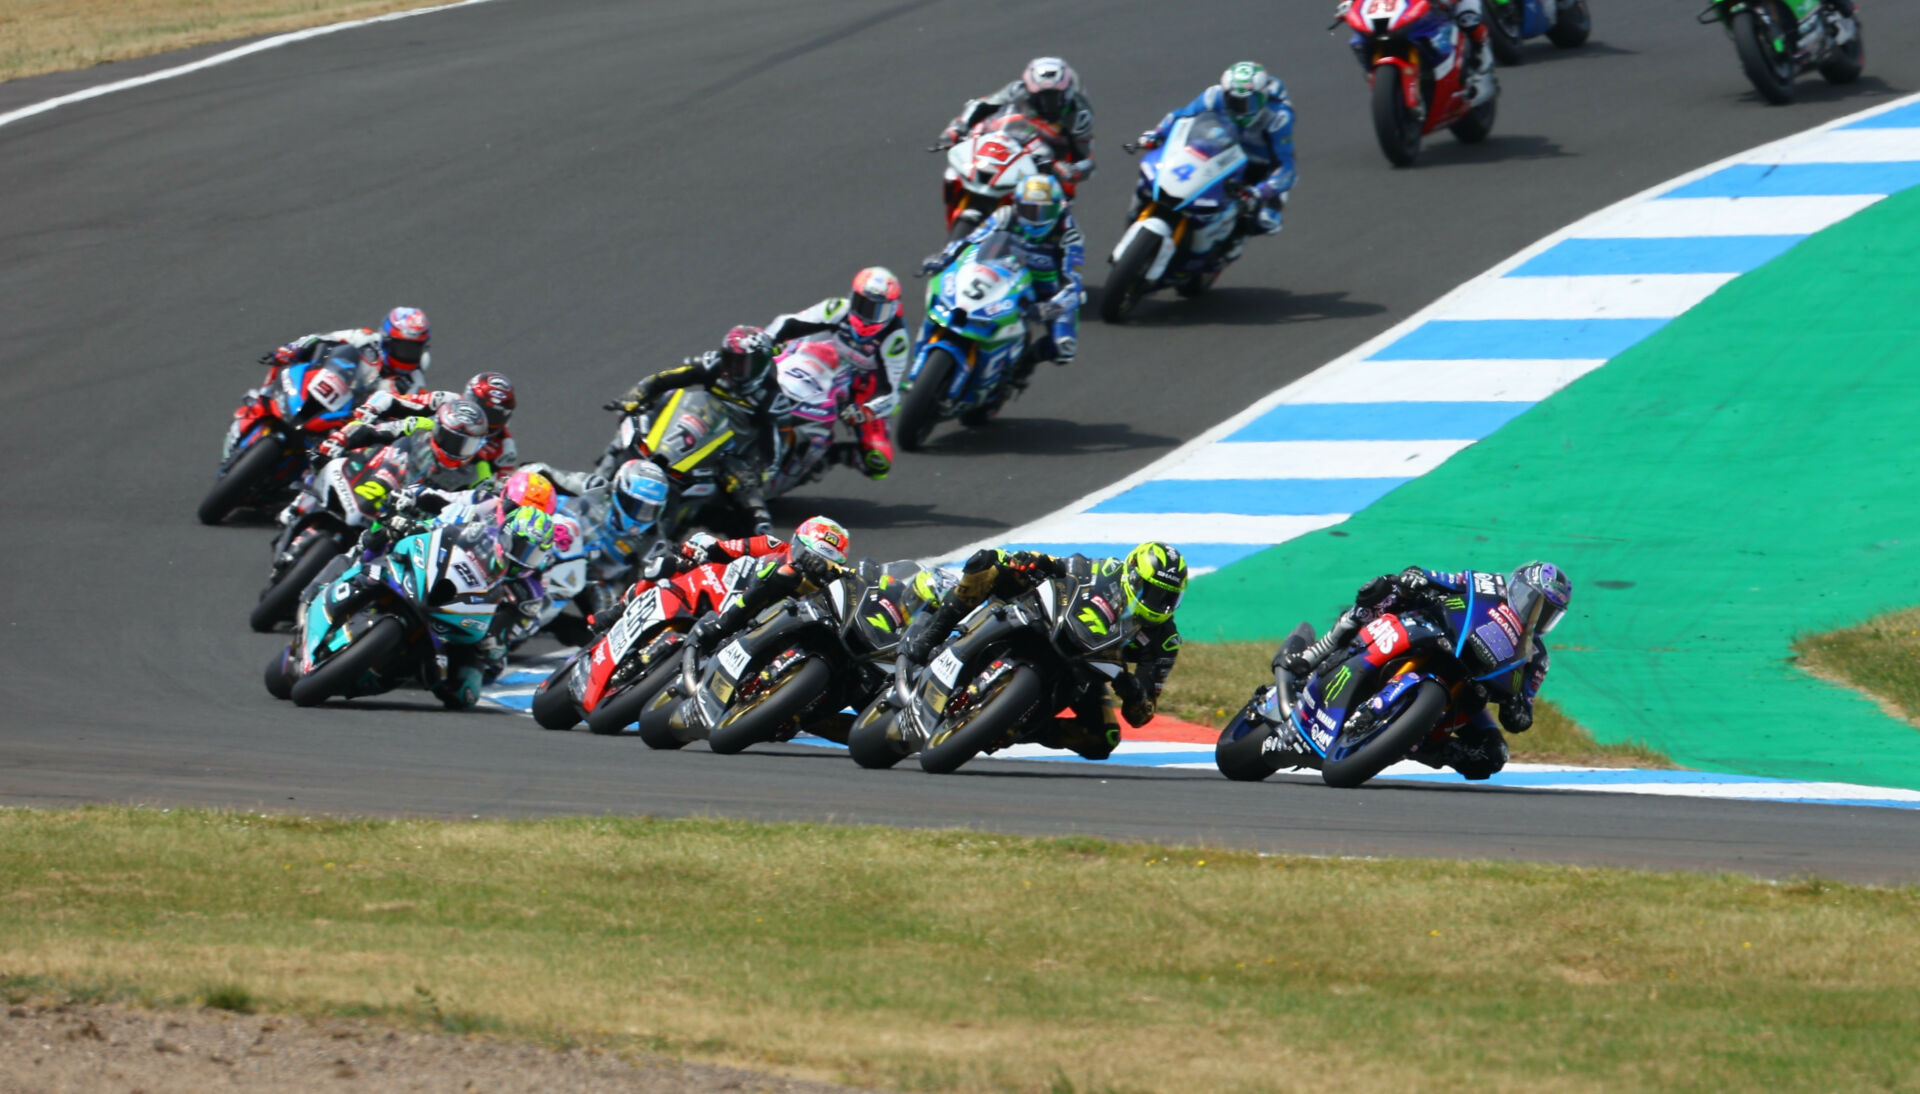 Jason O'Halloran (22) leads Kyle Ryde (77) and the rest of the British Superbike field at Knockhill Circuit. Photo courtesy MSVR.